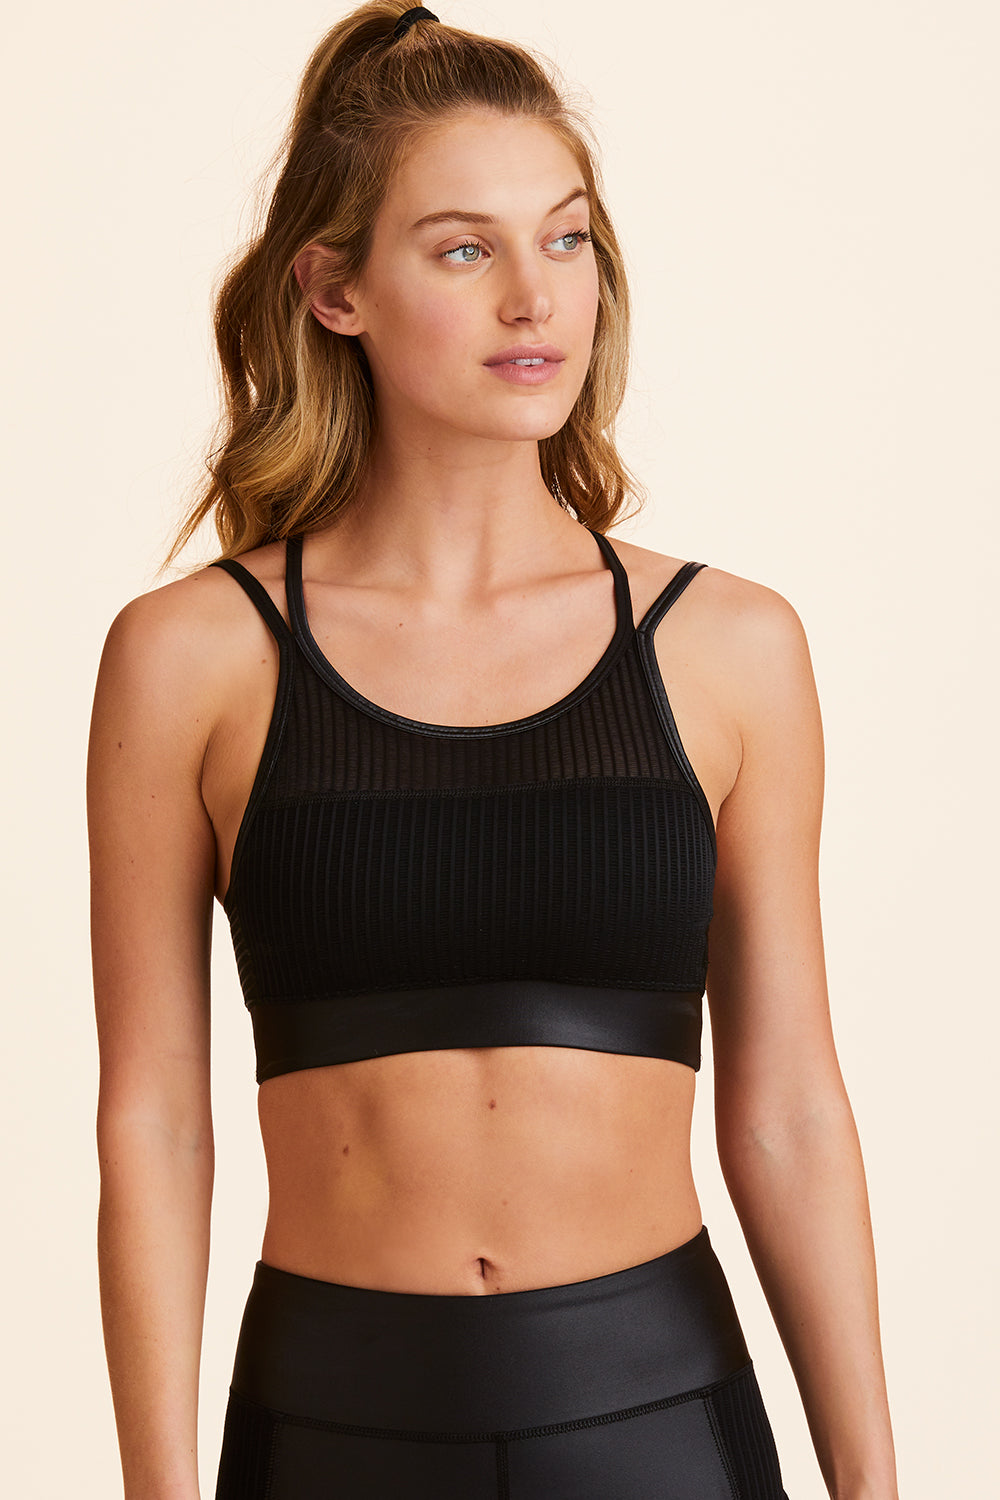 Change your bra= Change your game 💪 Upgrade your Sports Bras now